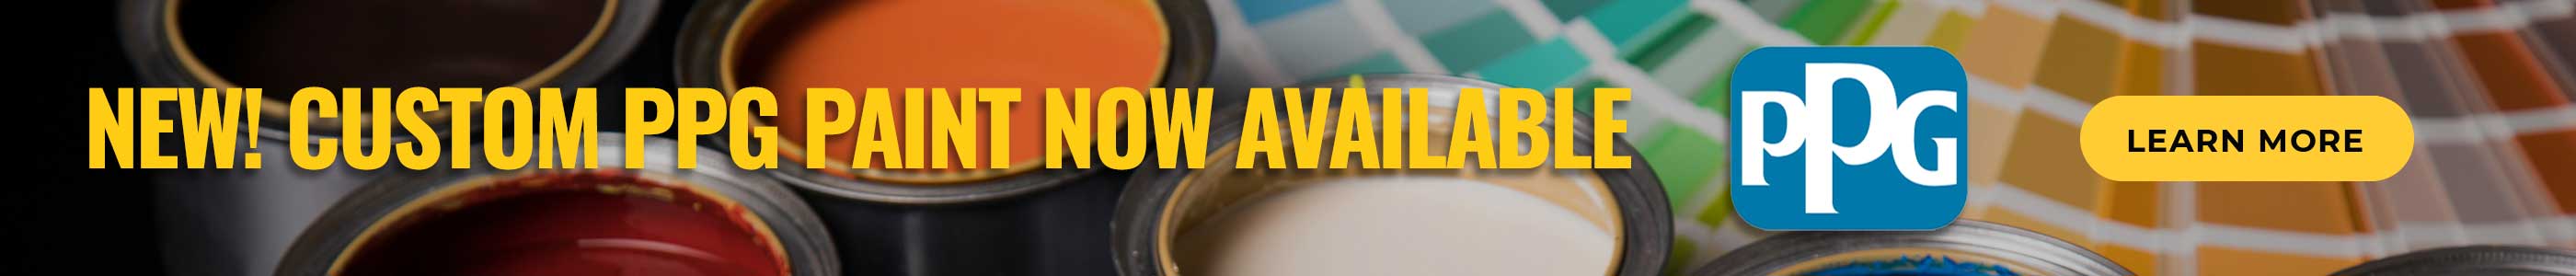 New! Custom PPG Paint Now Available - Learn More